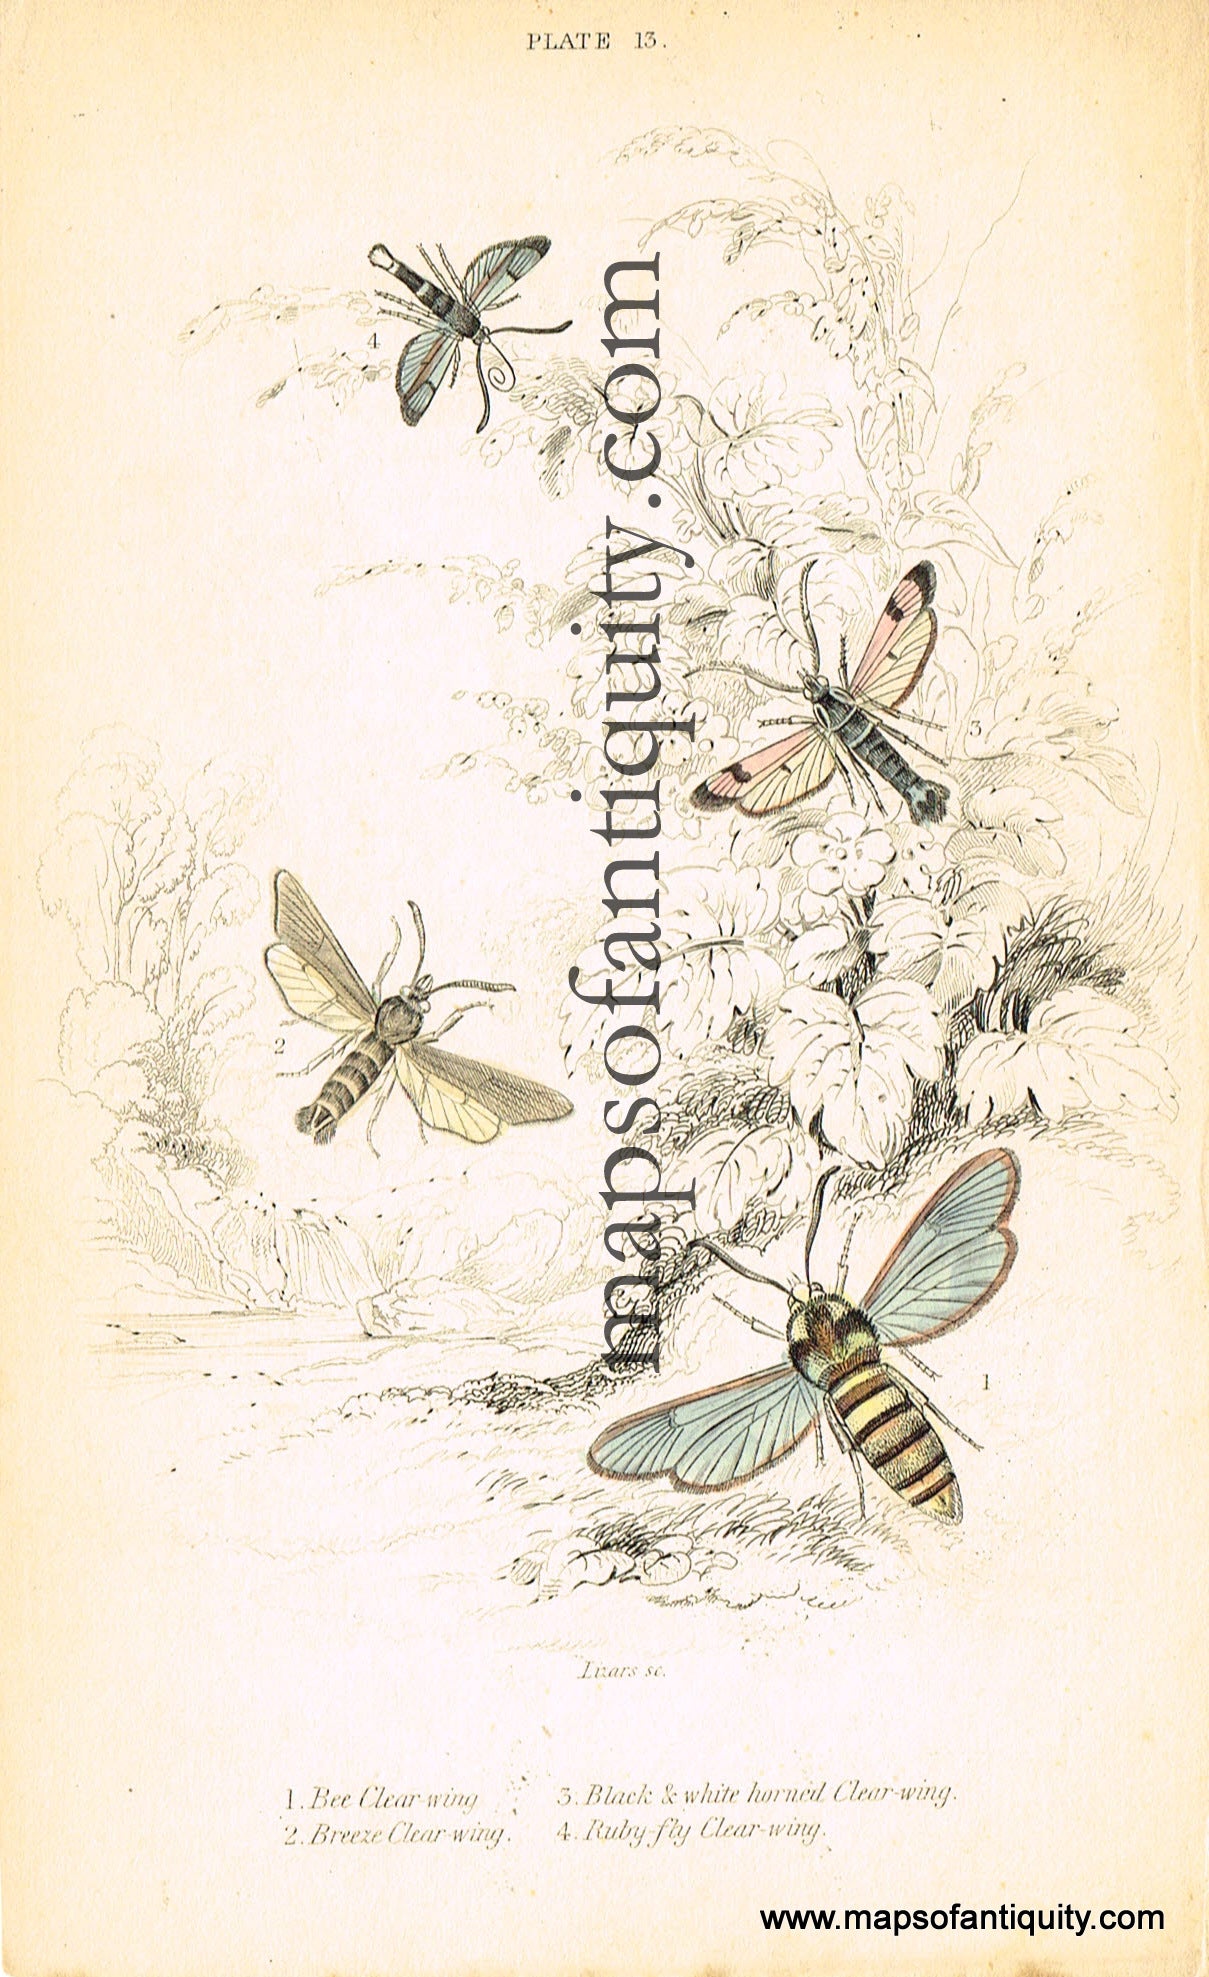 Antique-Hand-Colored-Print-Bee-Clear-wing-Breeze-Clear-wing-Black-&-white-horned-Clear-wing-and-Ruby-fly-Clear-wing-Antique-Prints-Natural-History-Insects-1840-Duncan-Maps-Of-Antiquity